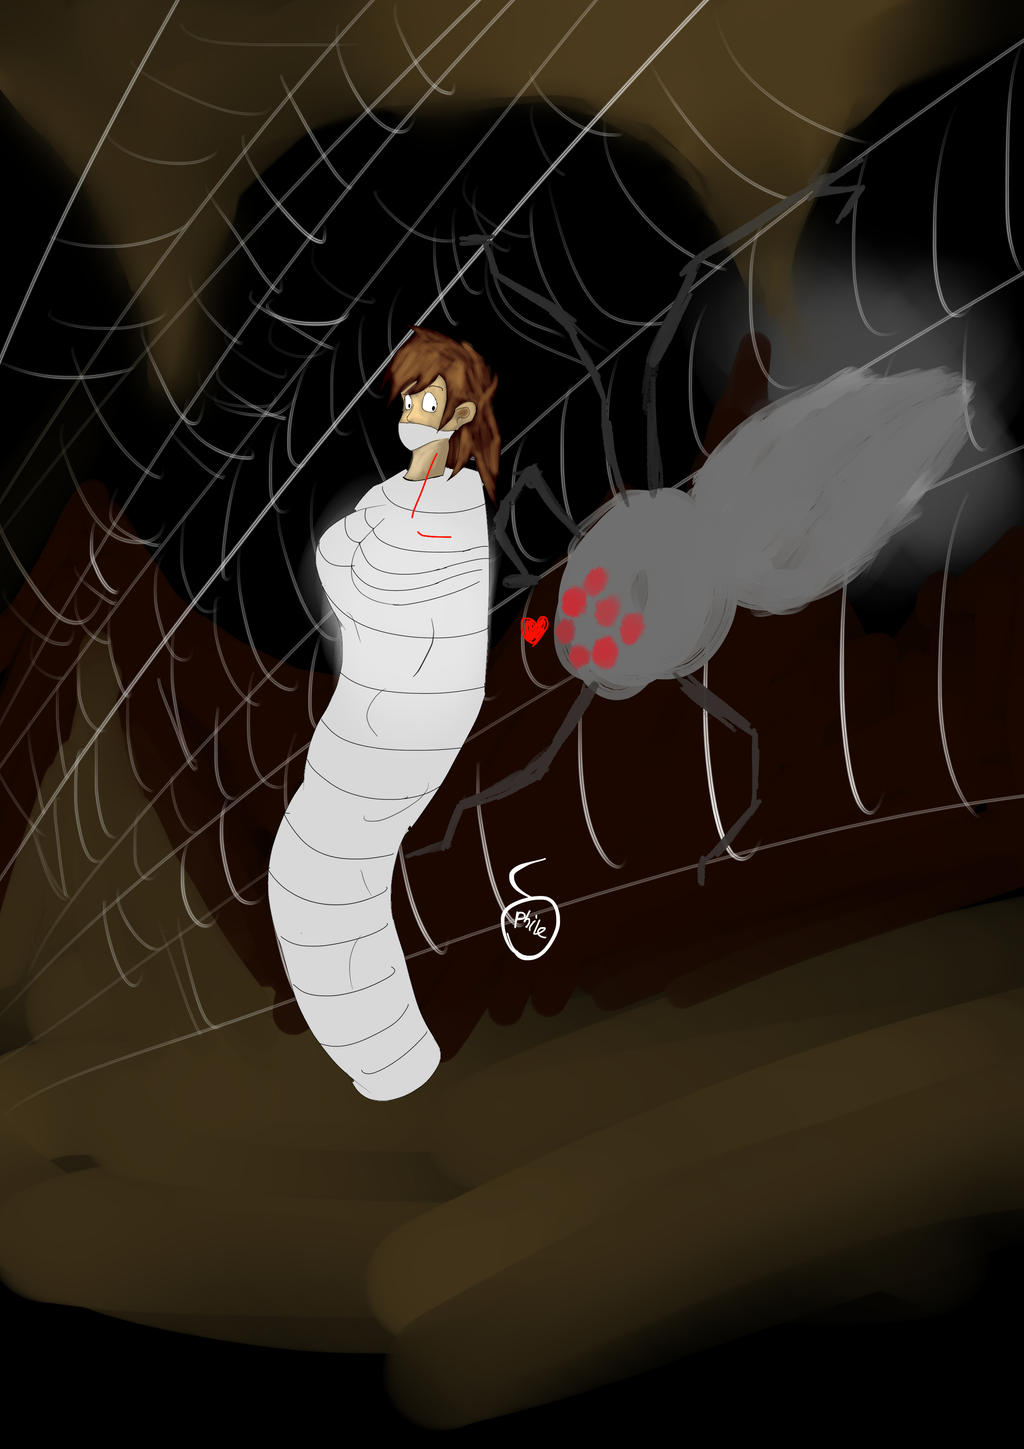 Shirley's Web (Spiderful)